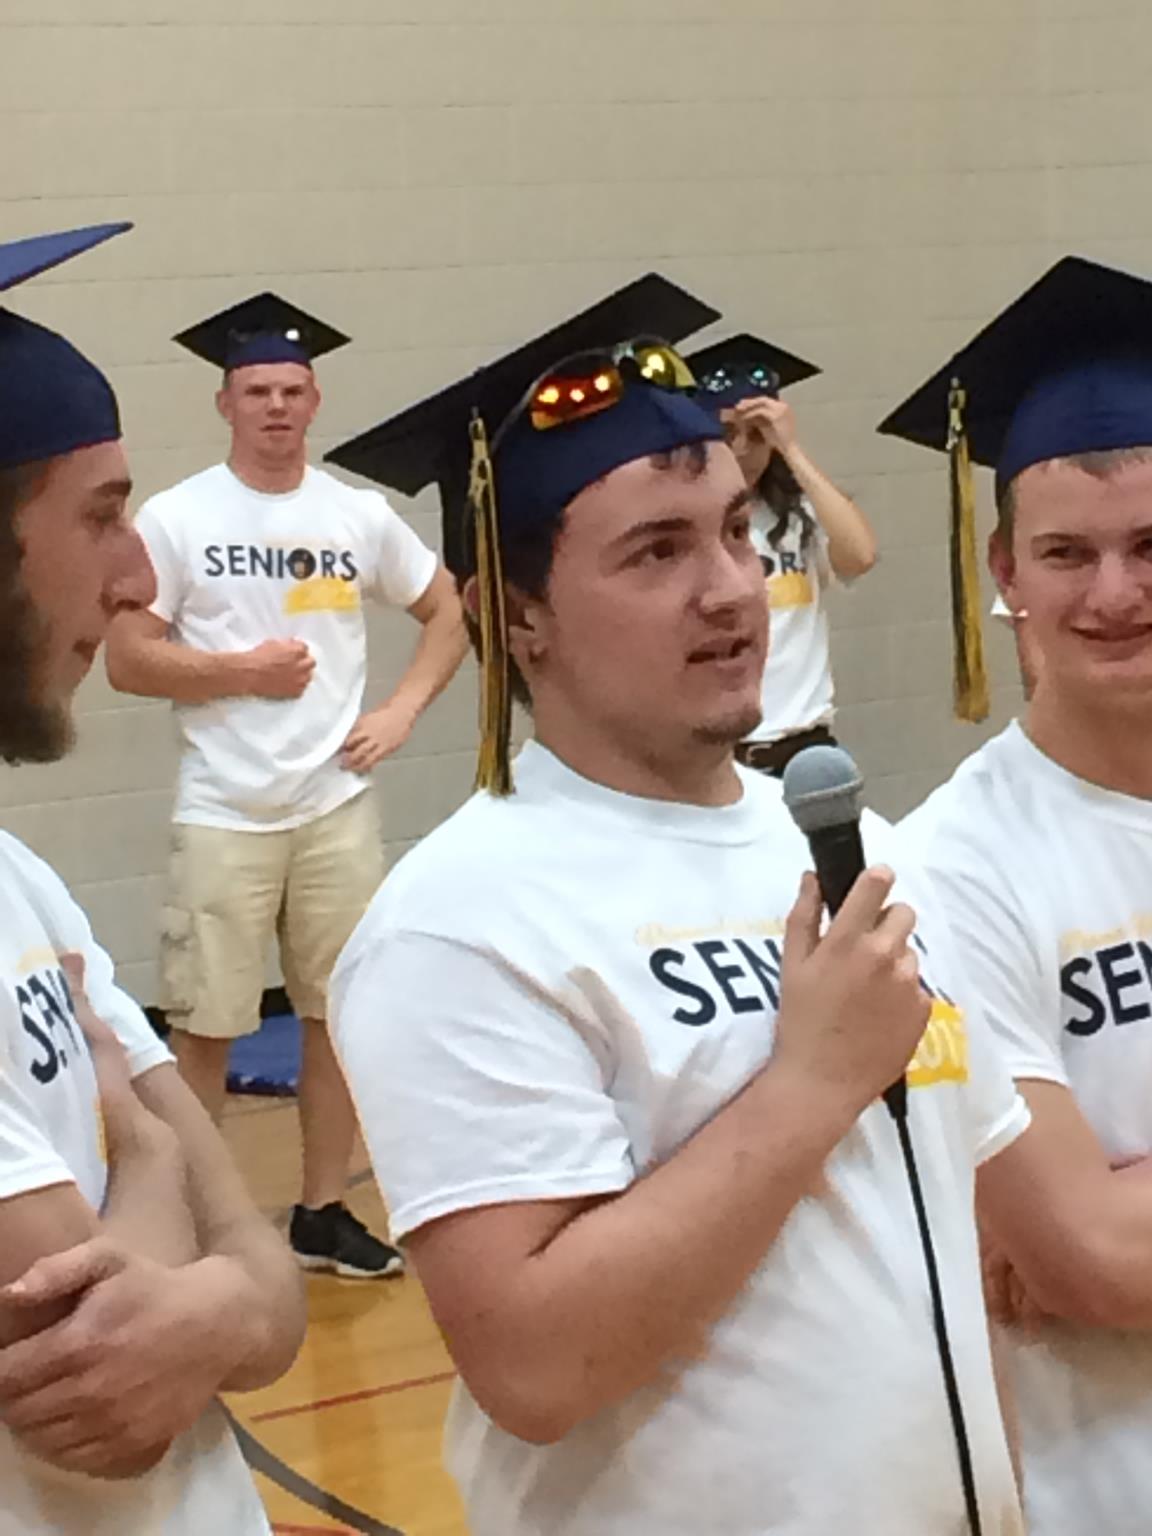 Cooper Wandell, Class of 2017, speaks to students at Pewamo Elementary School as part of a "Senior Walk" in which the Class of 2017 went back to the local elementary schools to visit their old teachers and inspire the next generation of Pirates.